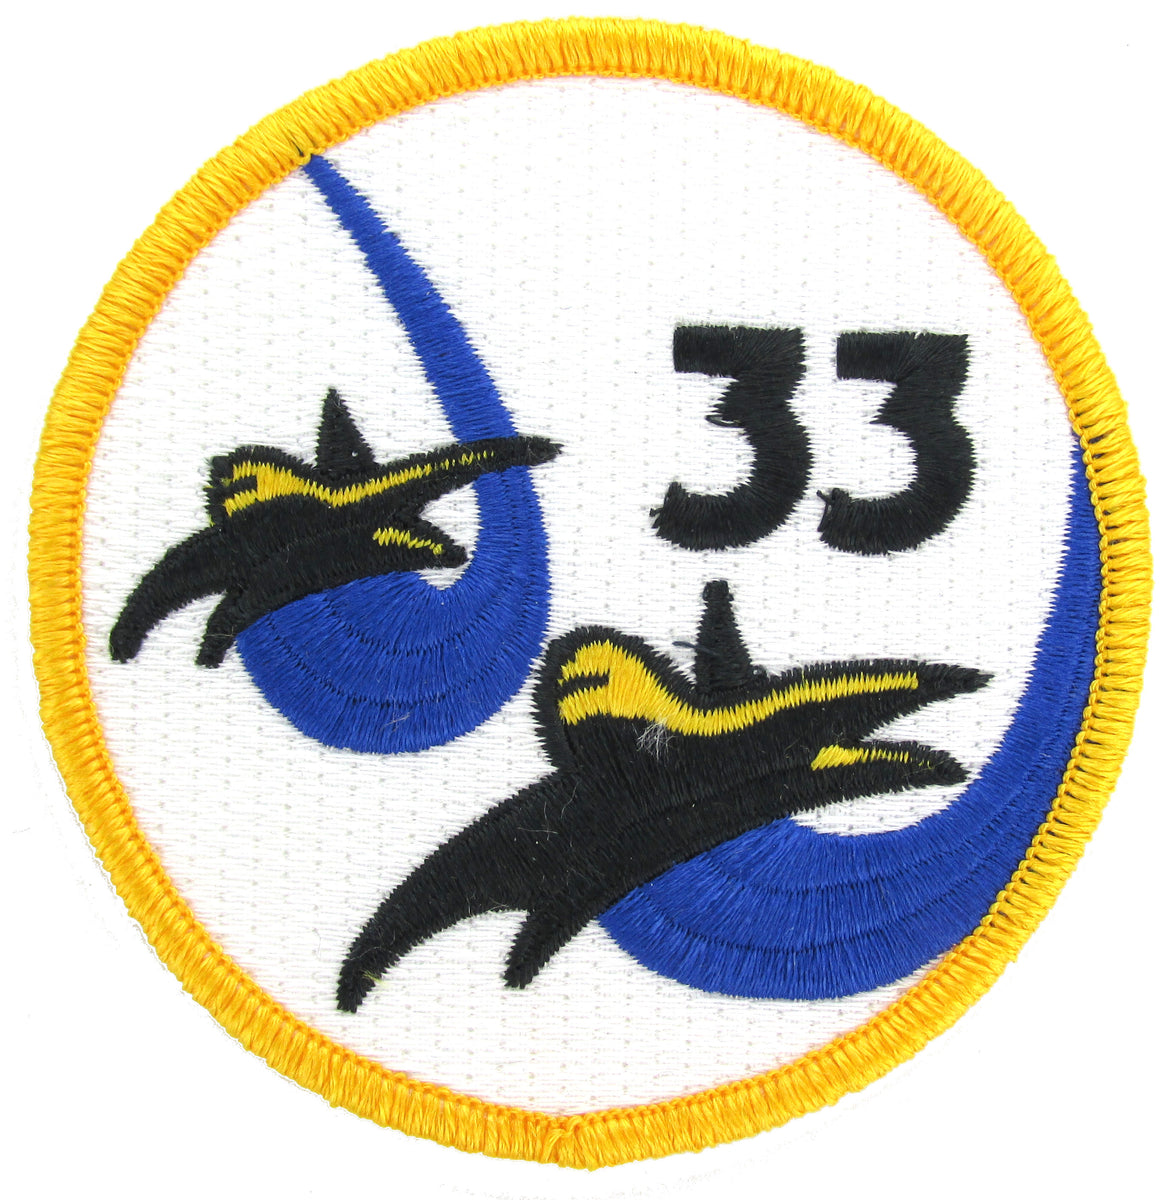 Surplus Usaf Us Air Force Academy Usafa Crest Badge Insignia Patch